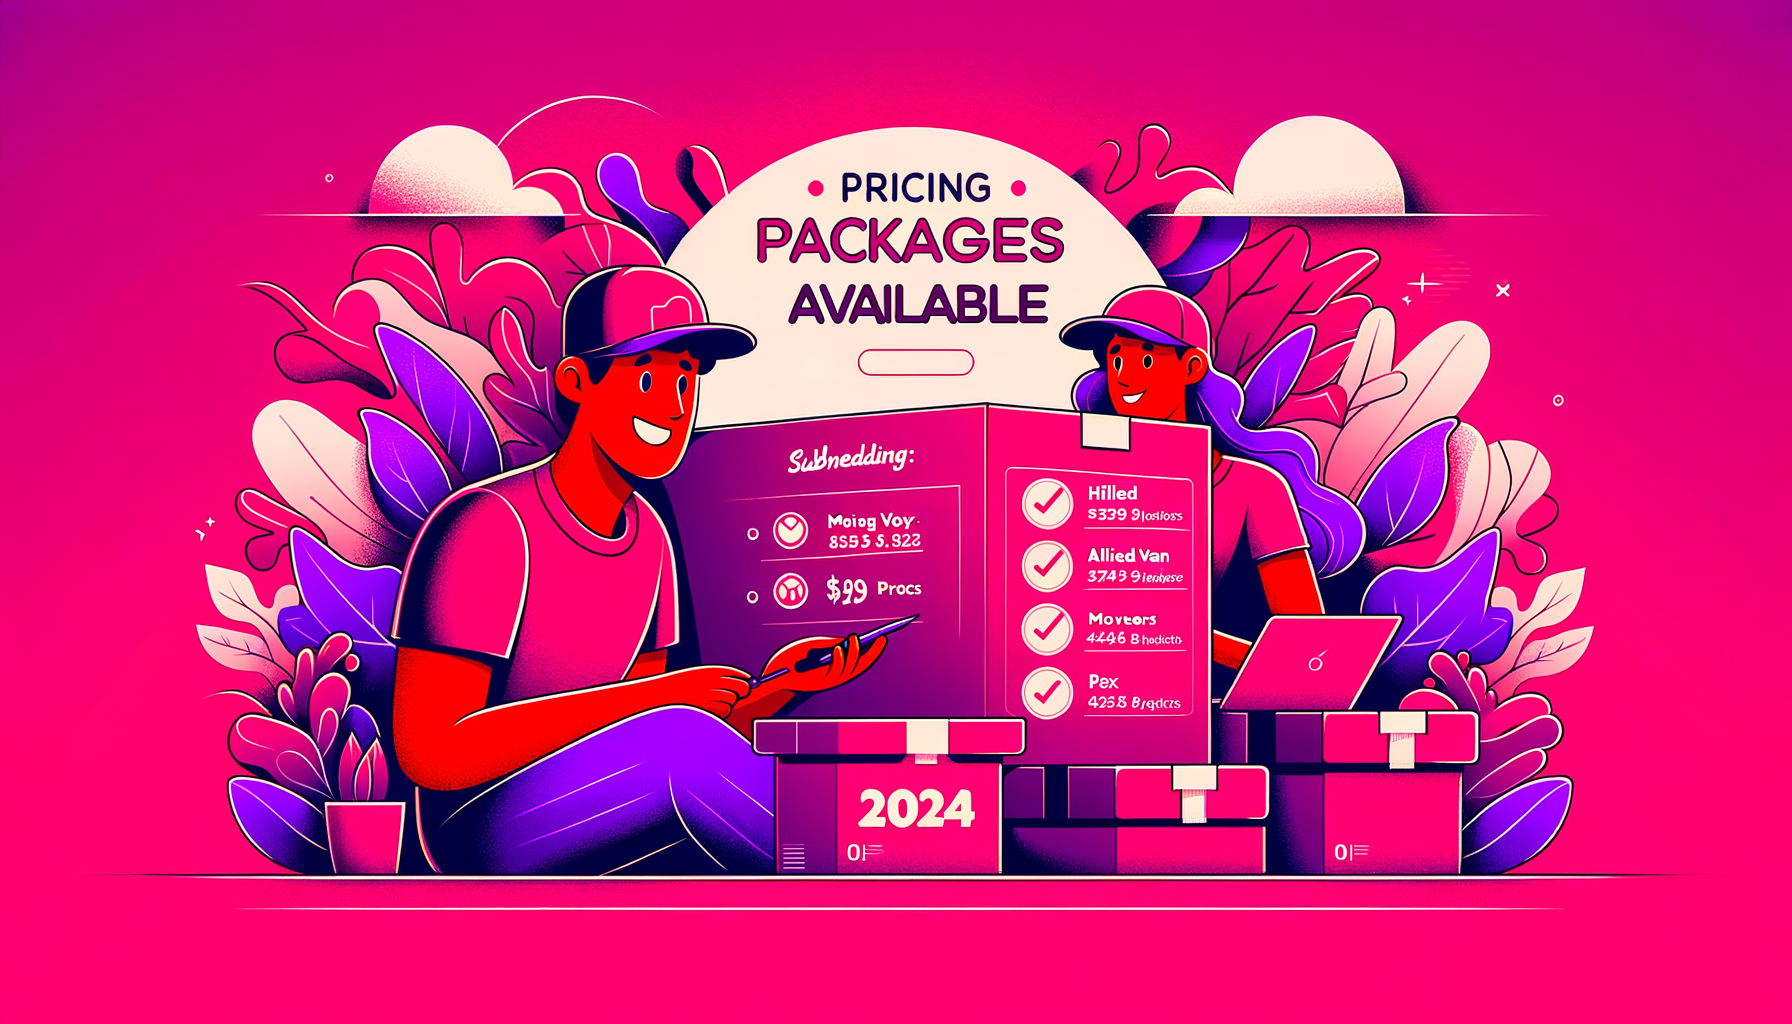 Cartoonish illustration in fuschia tones showcasing different moving packages and pricing labels, symbolizing Allied Van Lines services for 2024 moves.